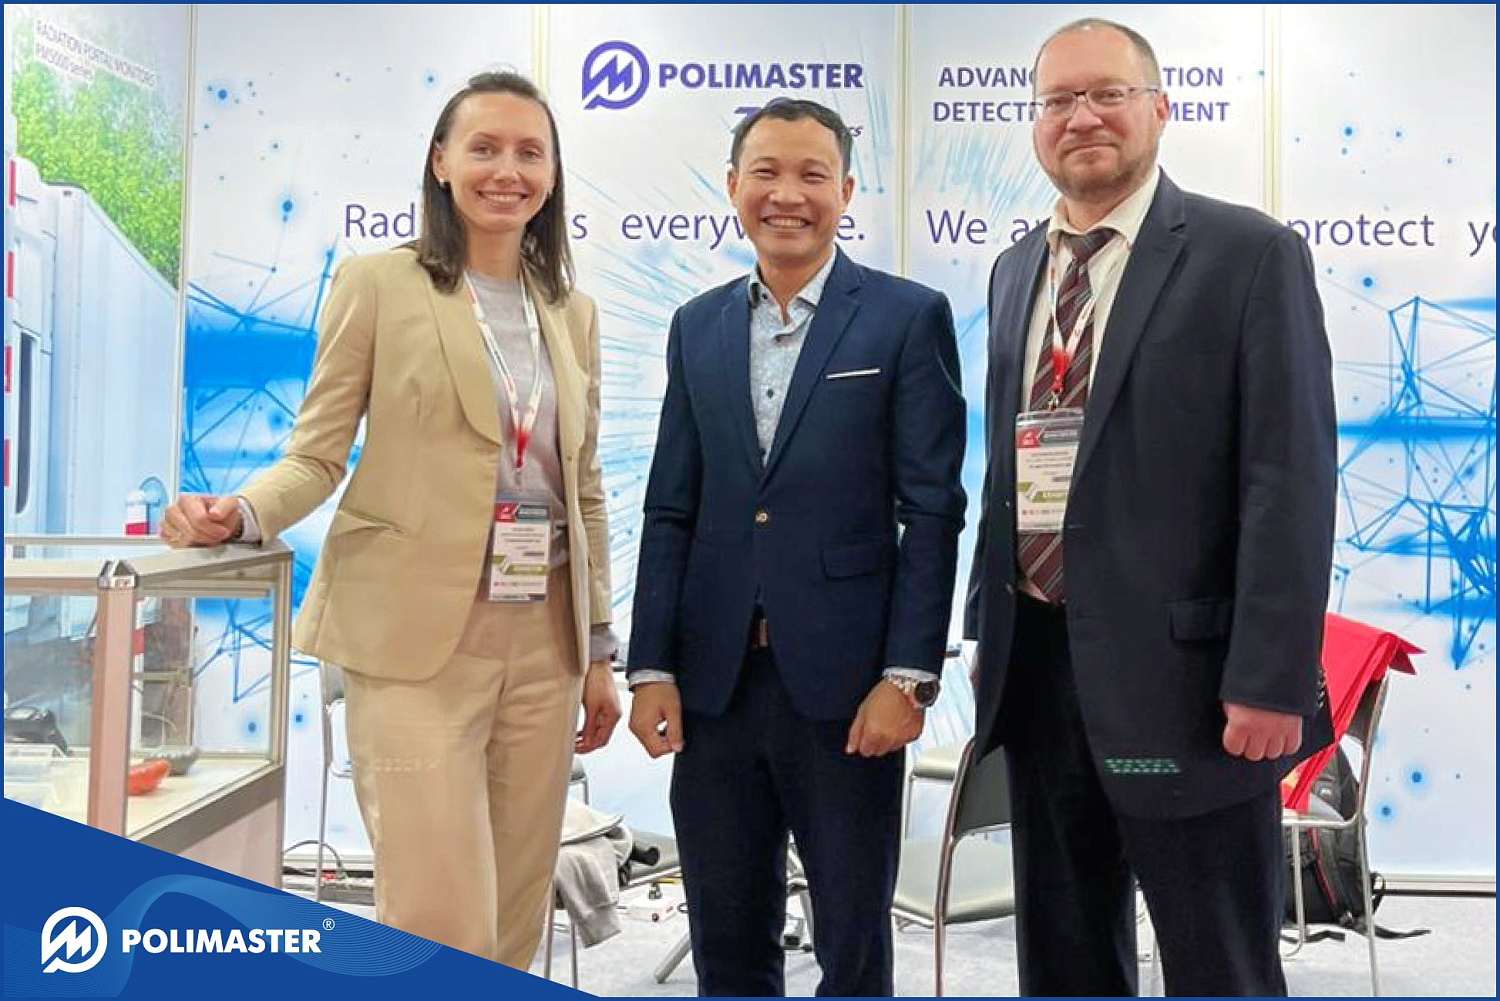 Polimaster at Vietnam Defence Expo in Hanoi